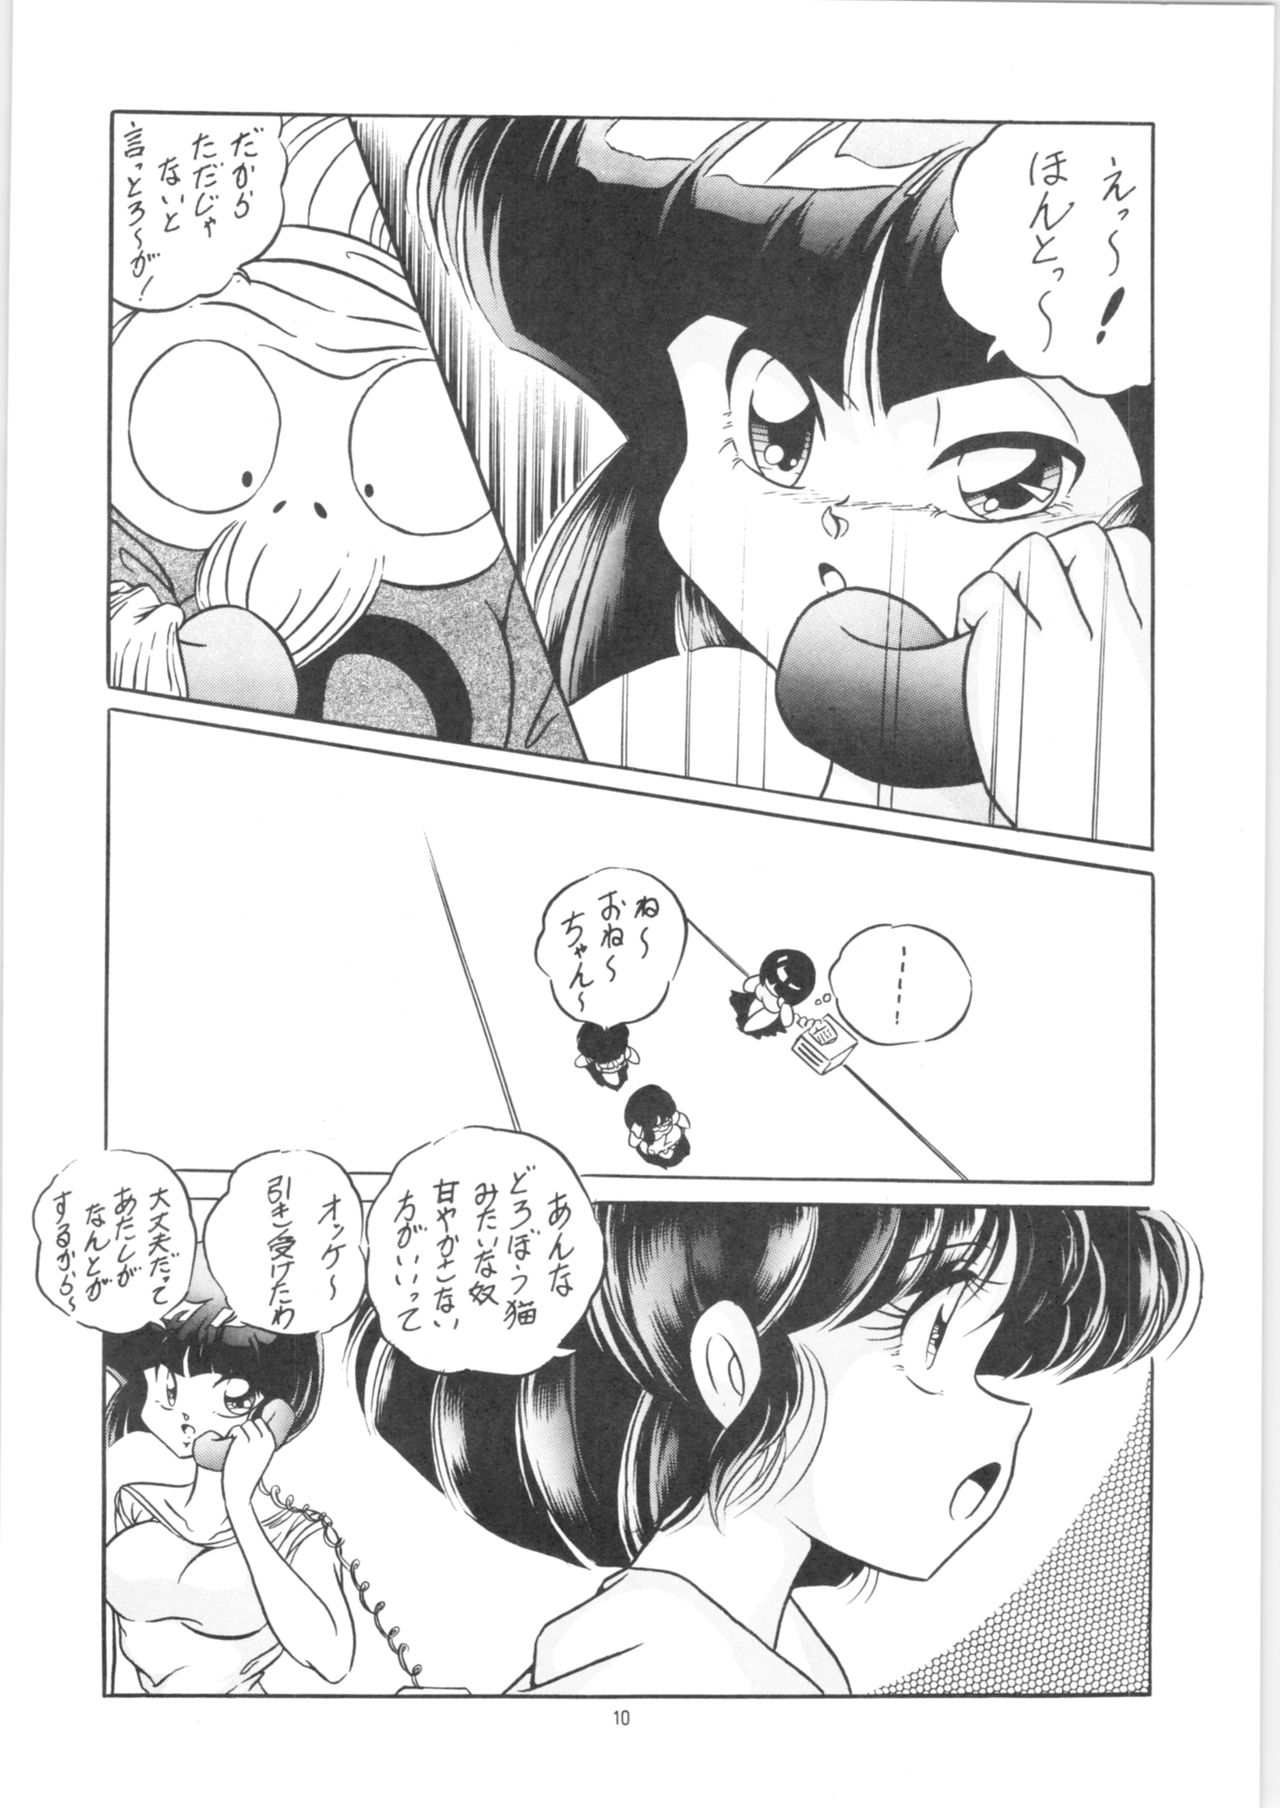 [C-COMPANY] C-COMPANY SPECIAL STAGE 13 (Ranma 1/2) page 11 full